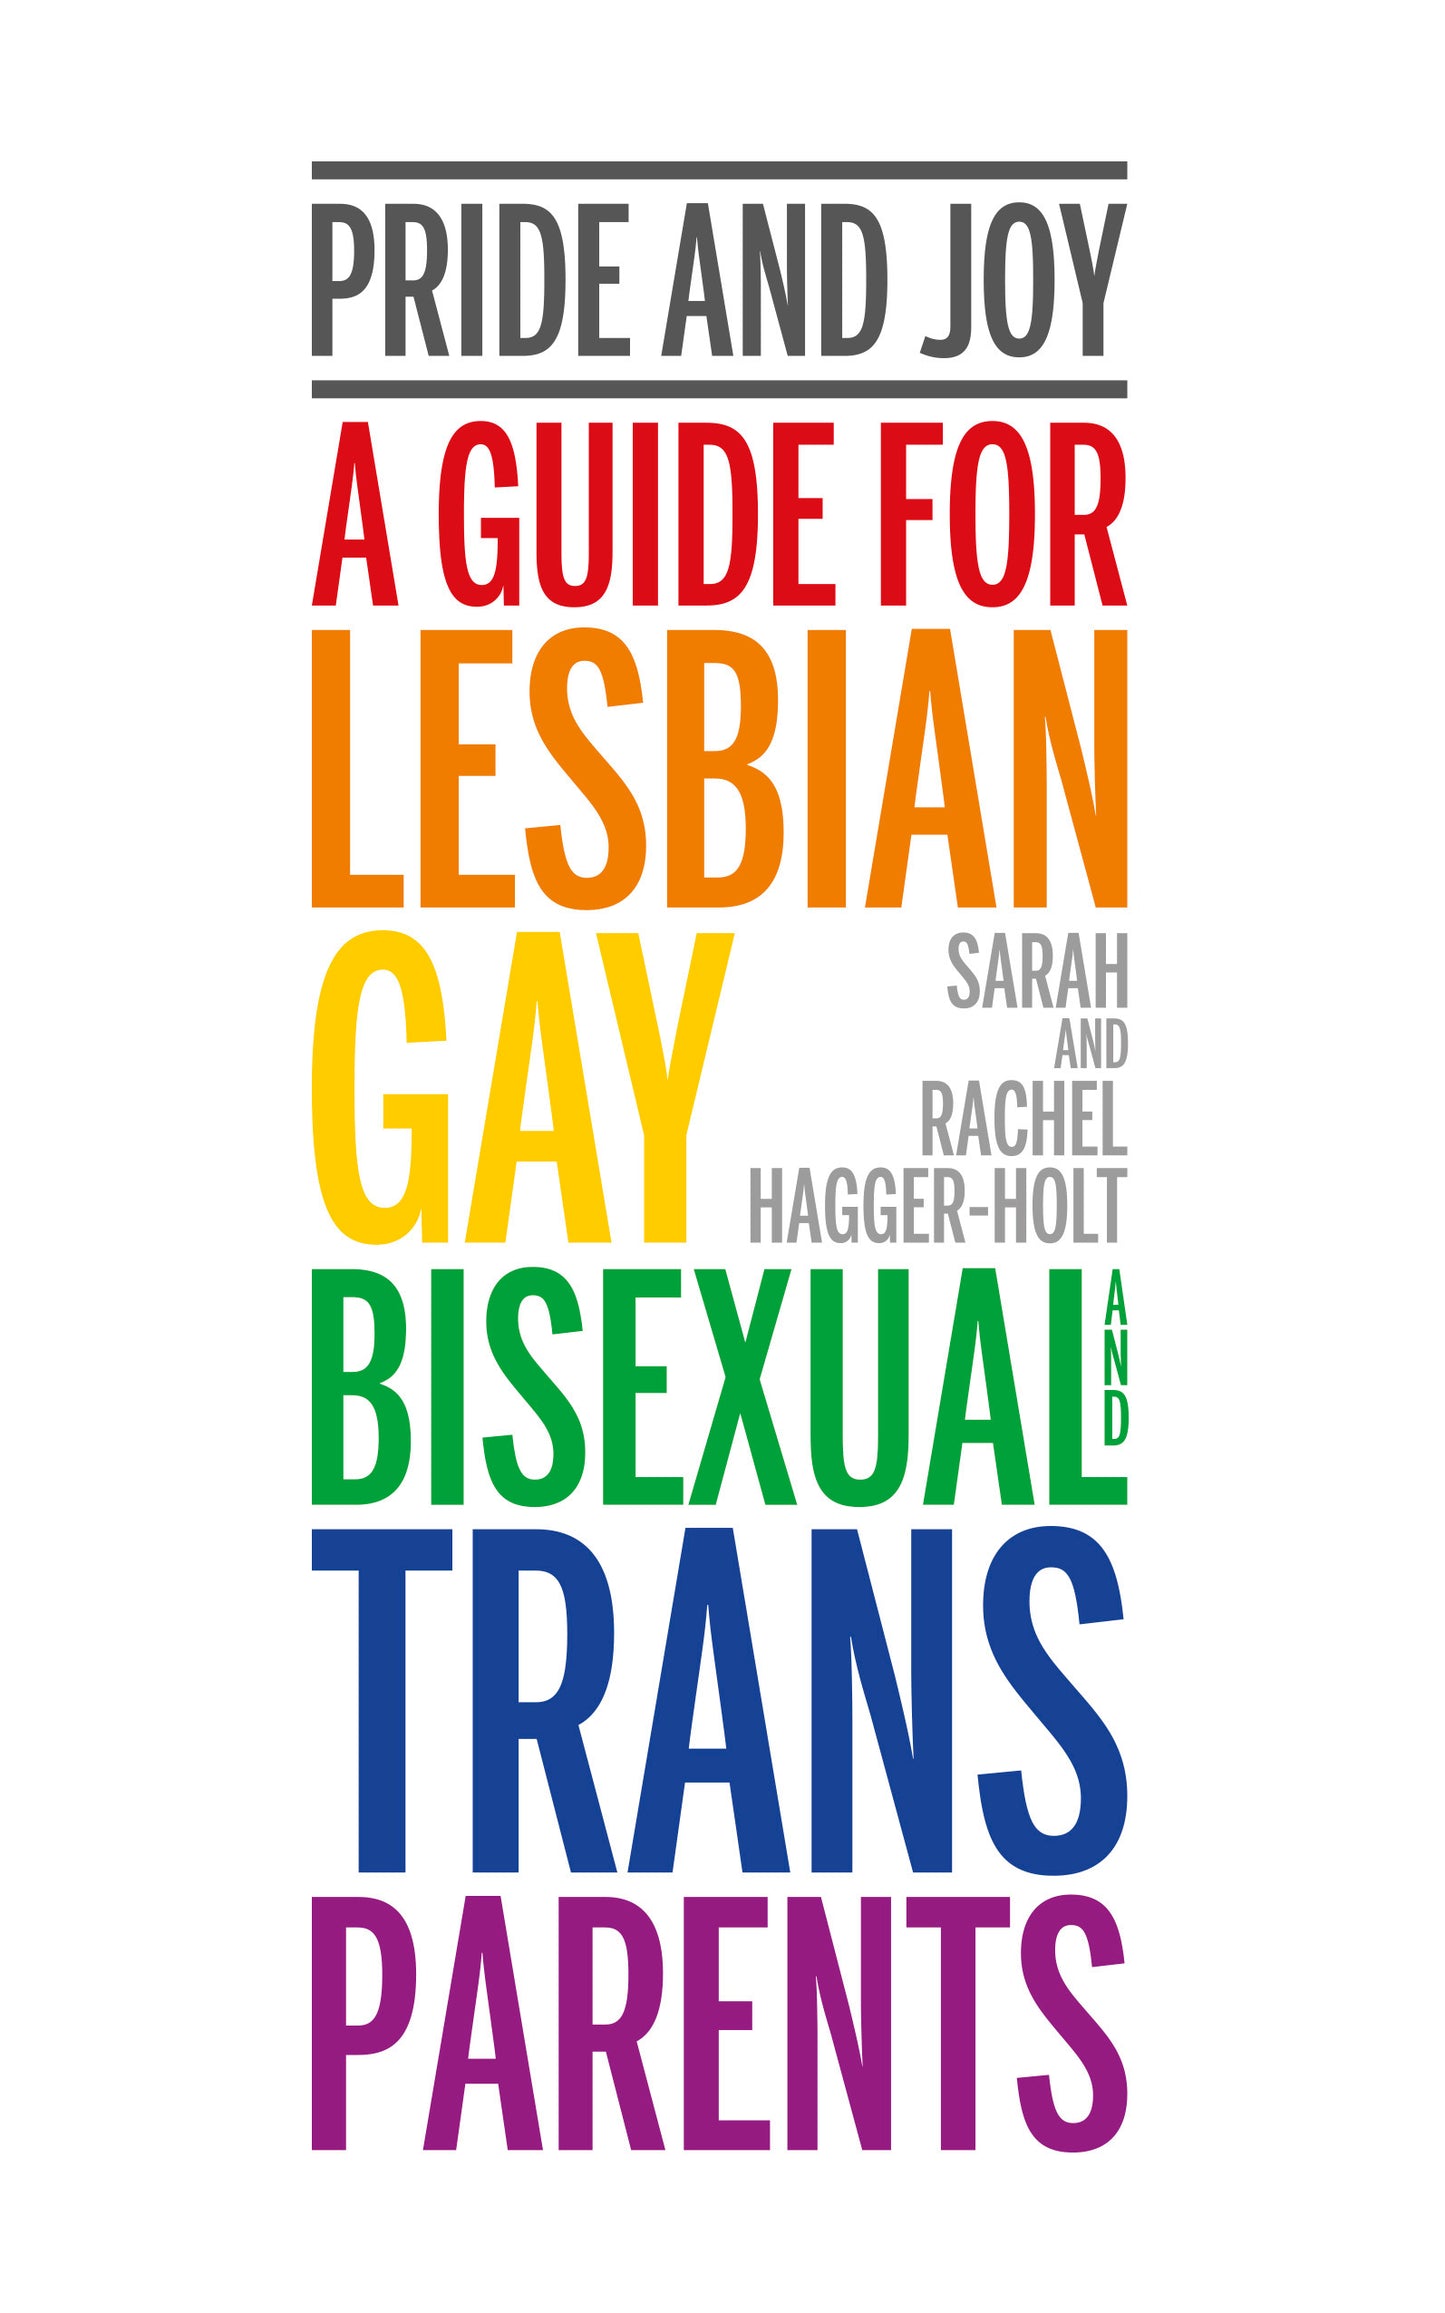 Pride and Joy: A guide for lesbian, gay, bisexual and trans parents